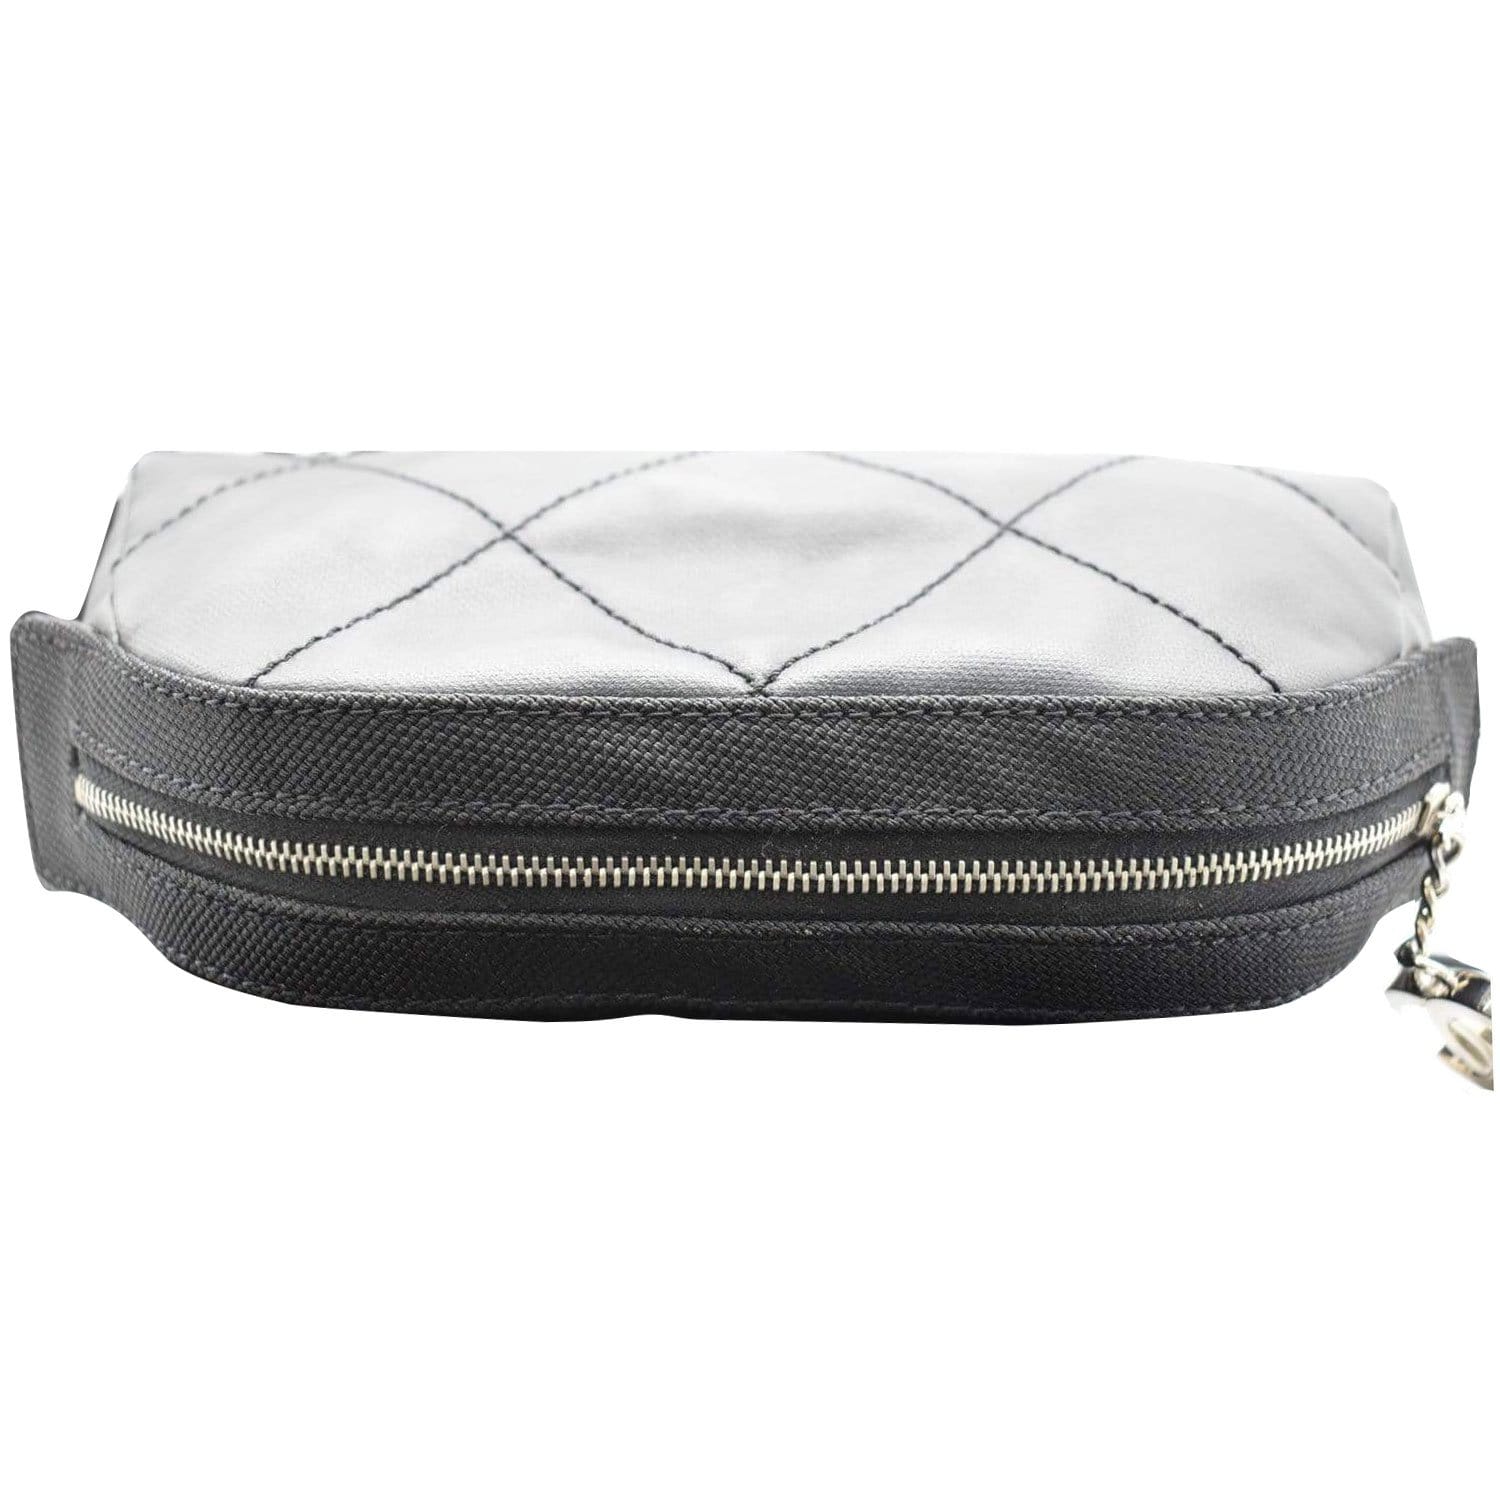 CHANEL Lambskin Quilted Small Curvy Pouch Cosmetic Case Black 176257